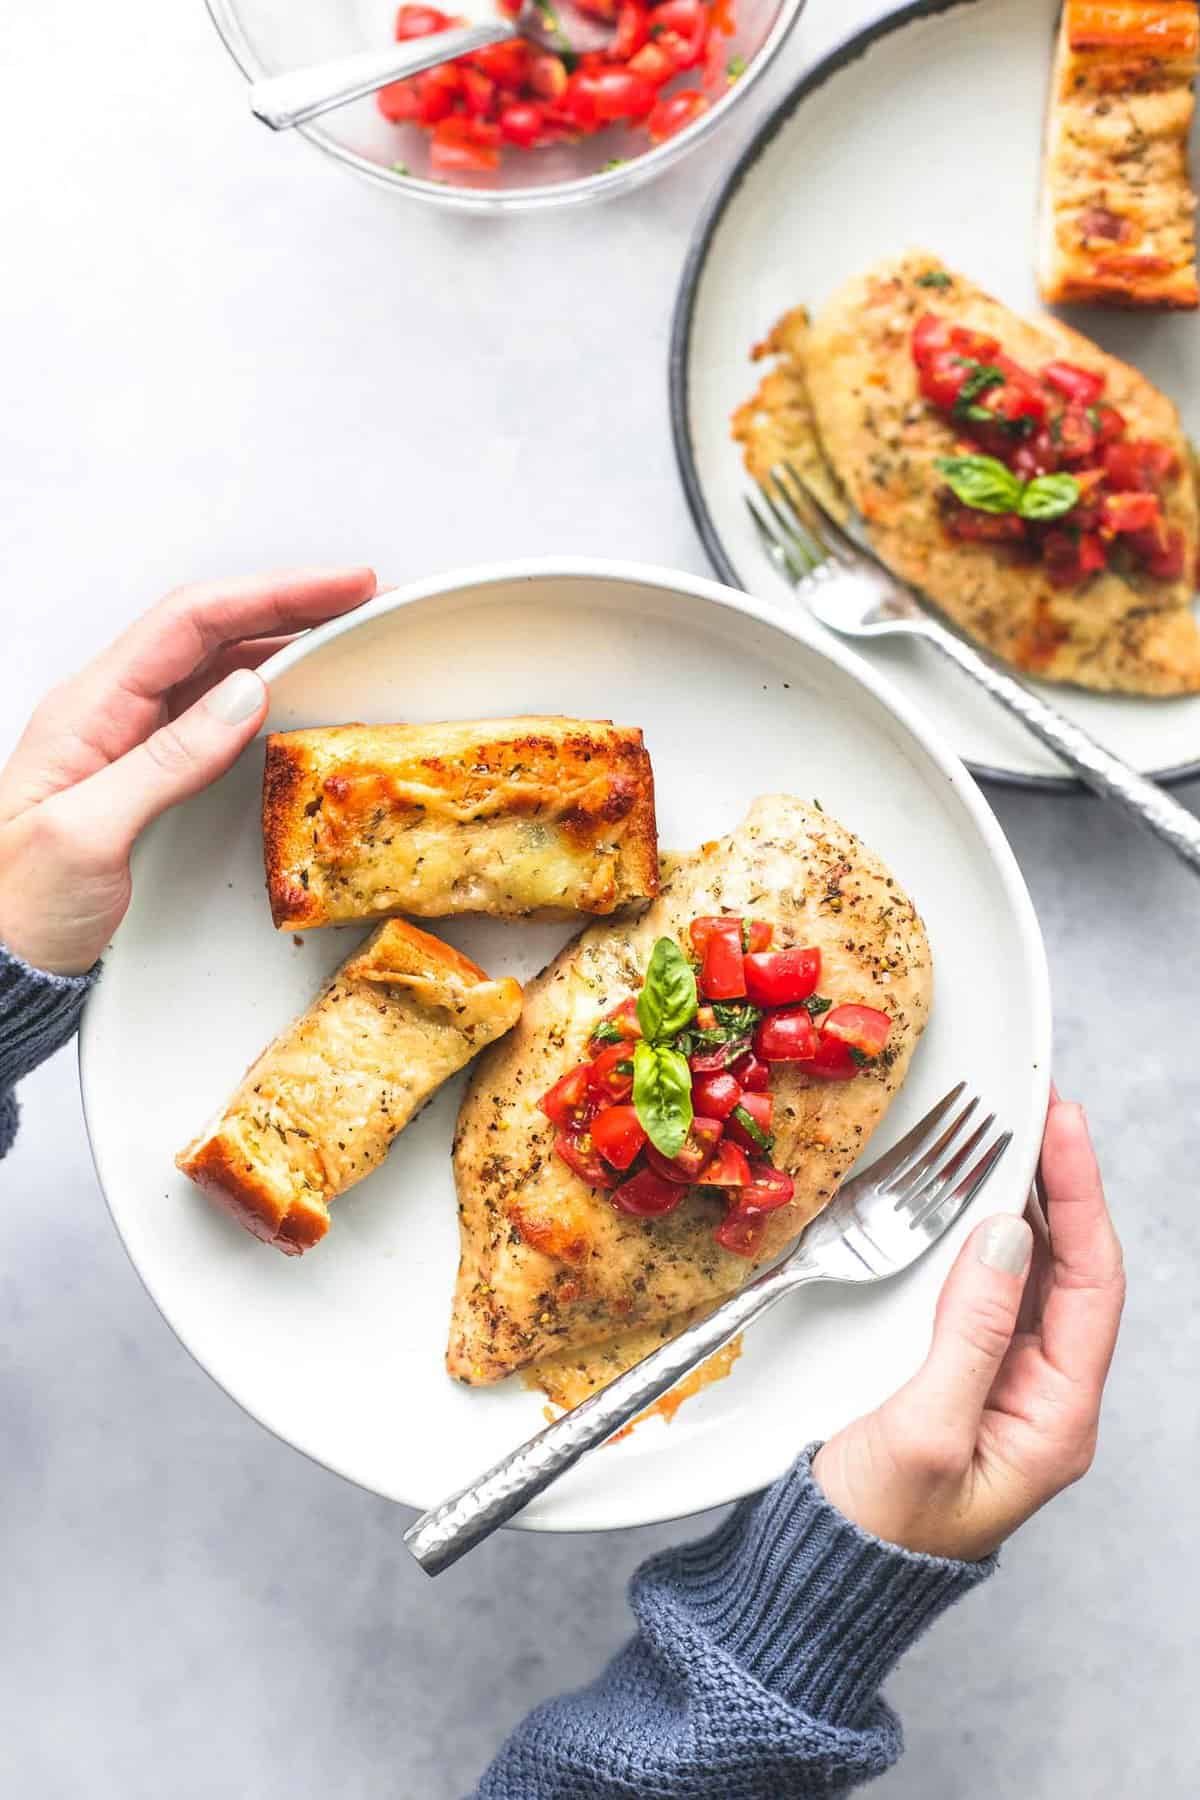 a pair of hands holding a plate with sheet pan bruschetta chicken and cheesy garlic bread and a fork on a it with another plate and a glass bowl of tomatoes on the side.